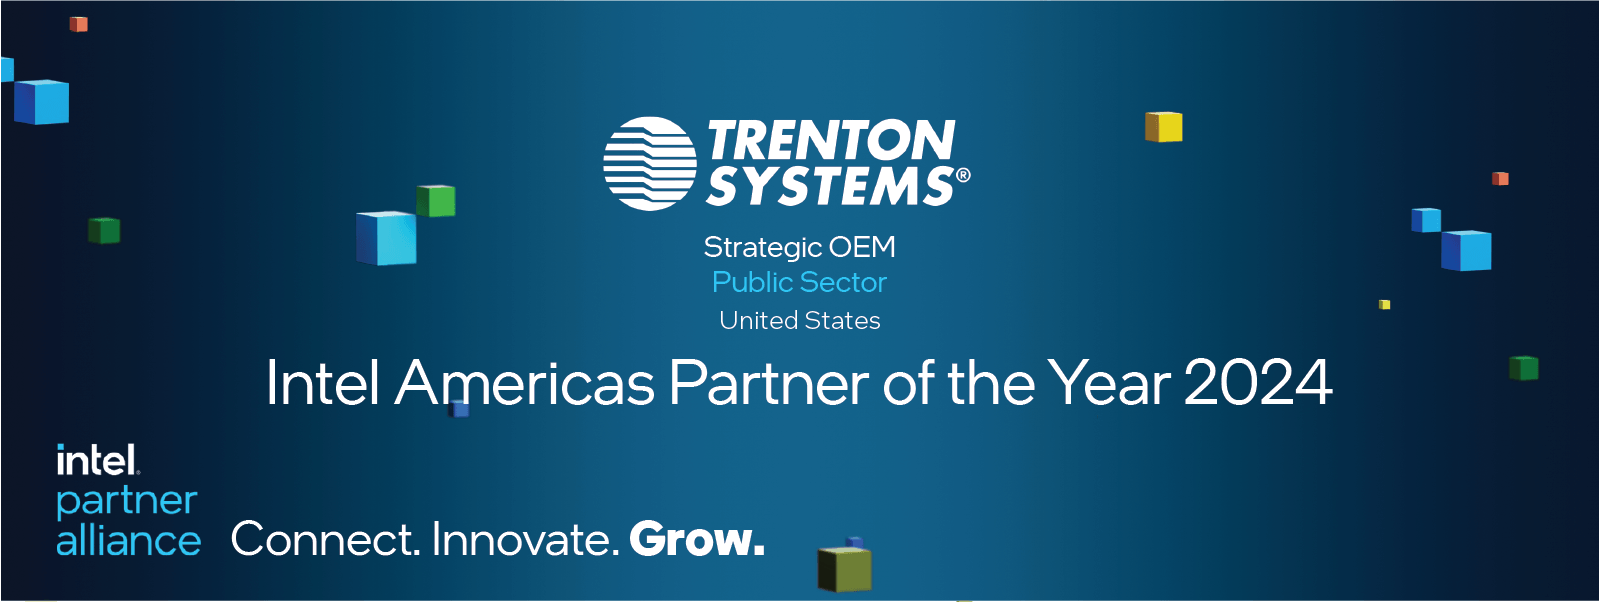 Trenton Partner of the Year - Email and Blog